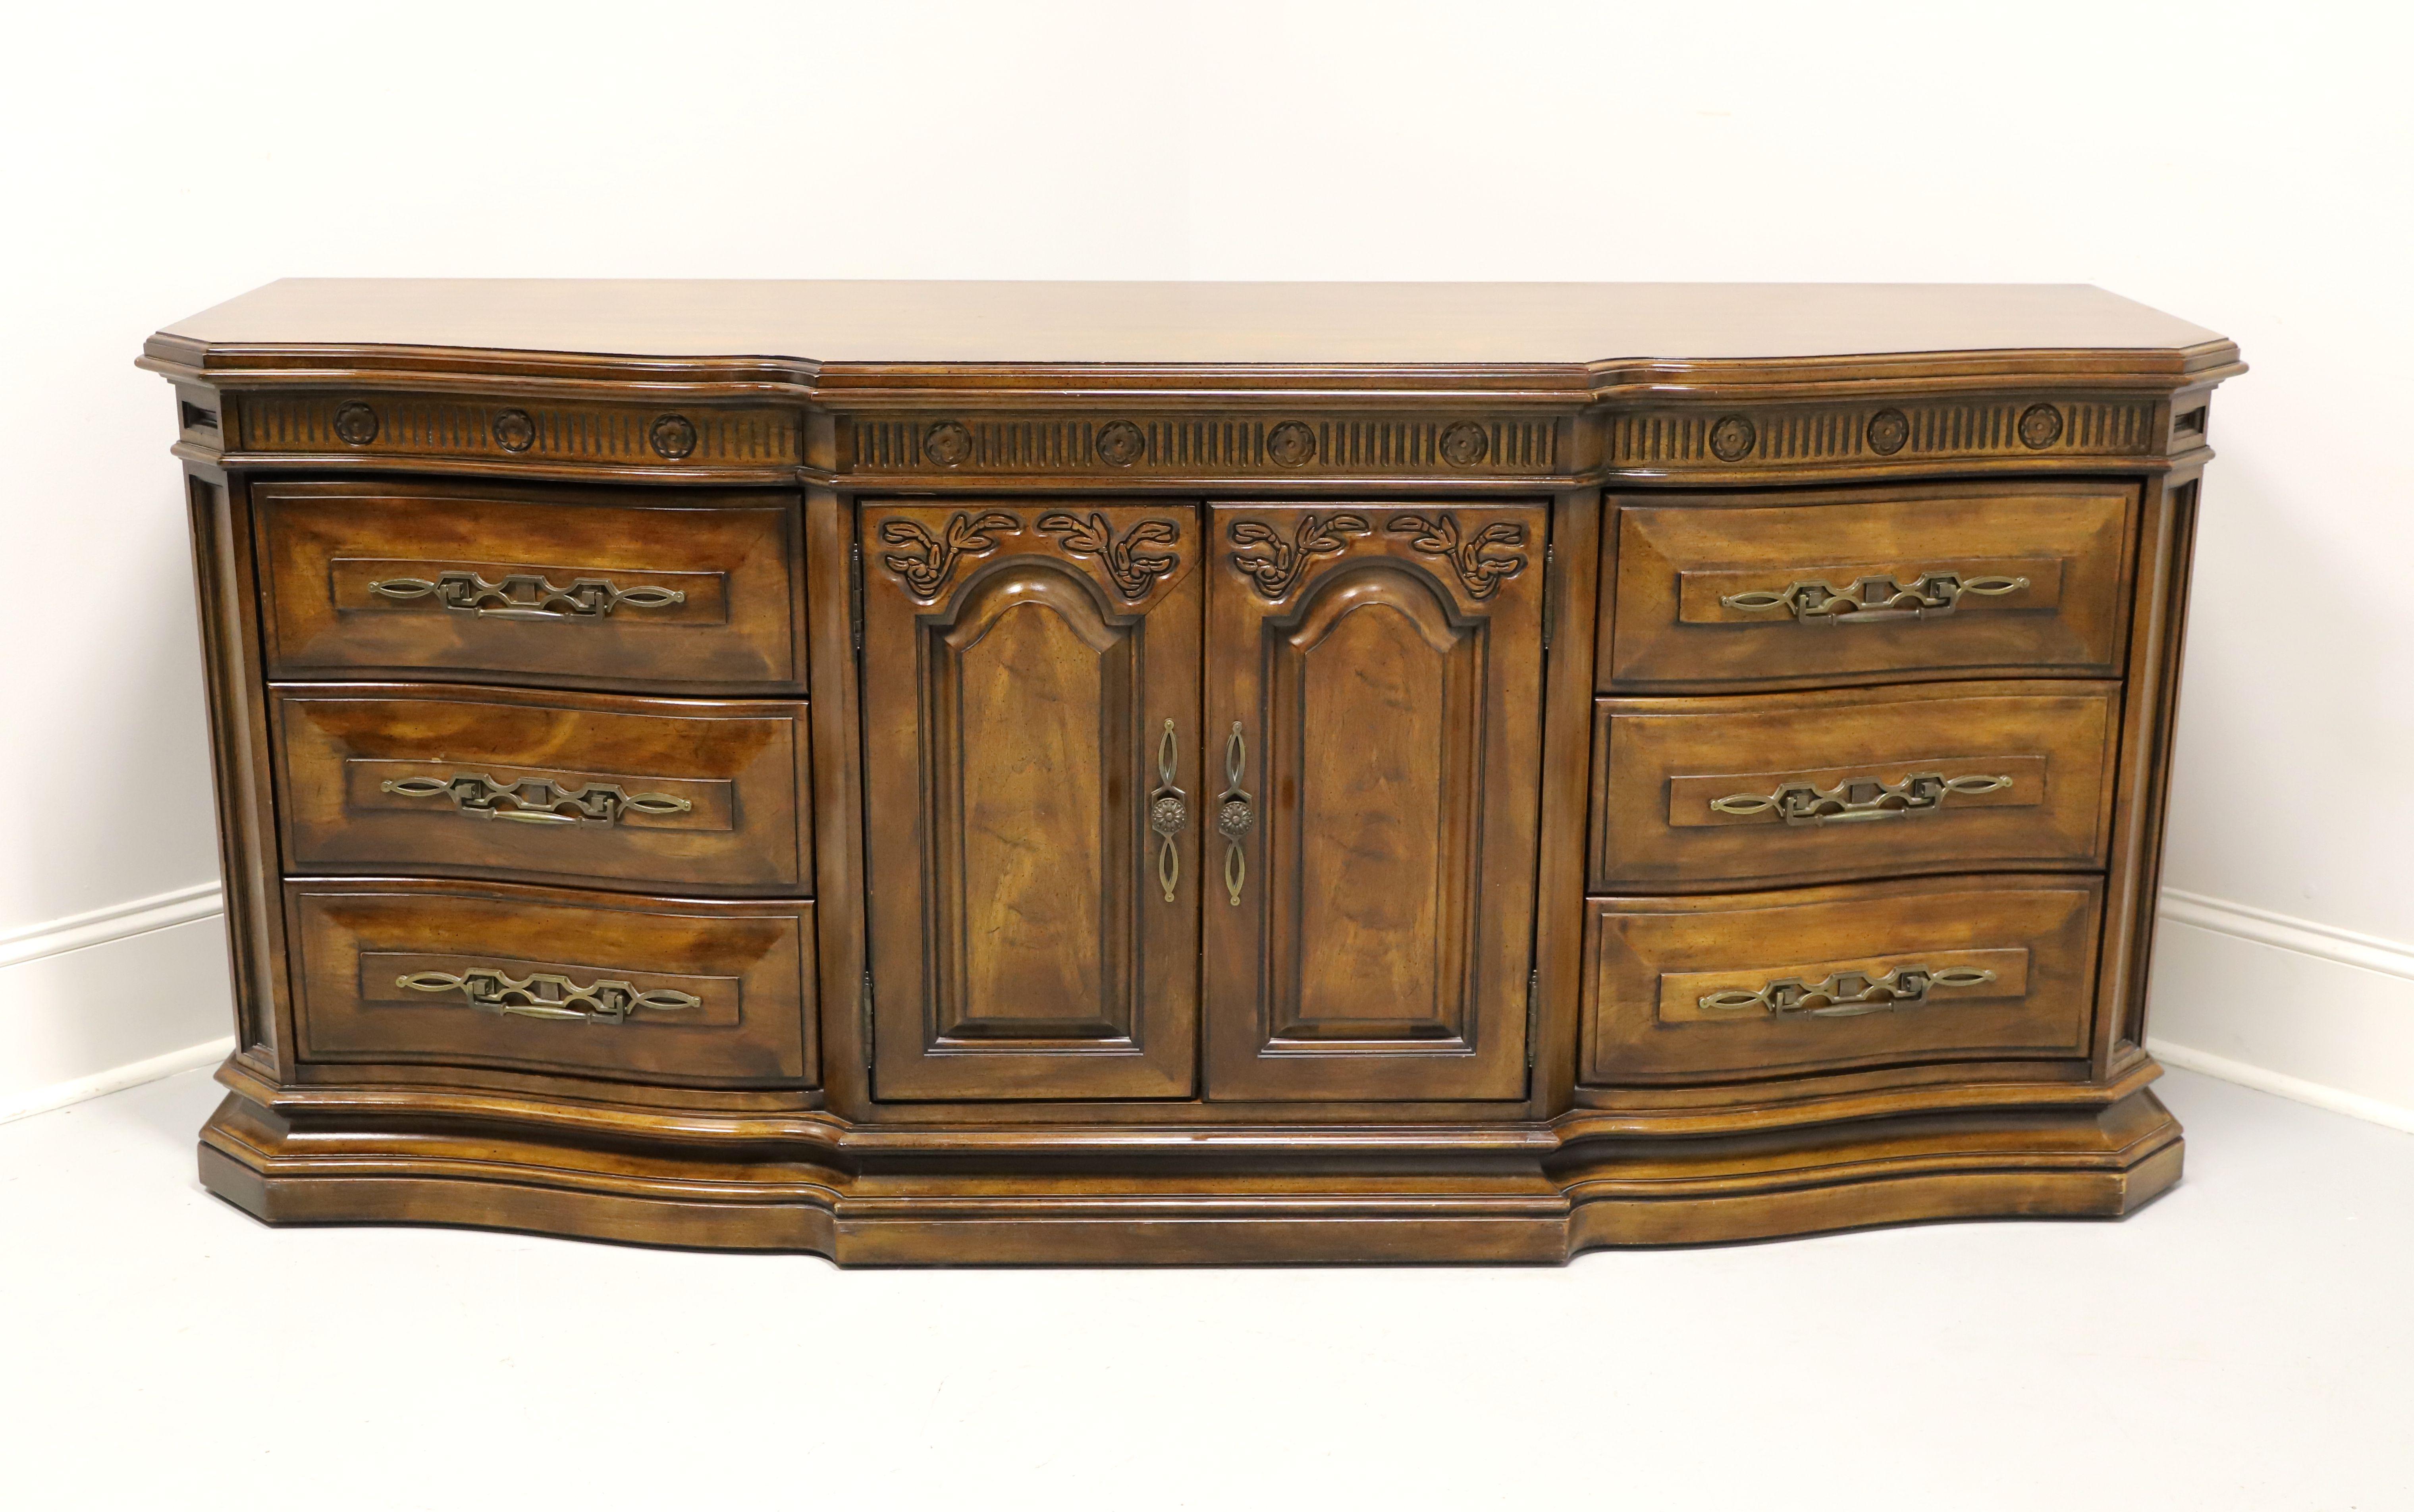 A French Country style triple dresser by White Furniture. Solid cherry wood with slightly distressed finish, ogee edge to the top, serpentine shape, brass hardware, decoratively carved frieze over doors & drawers, raised door & drawer fronts, and a